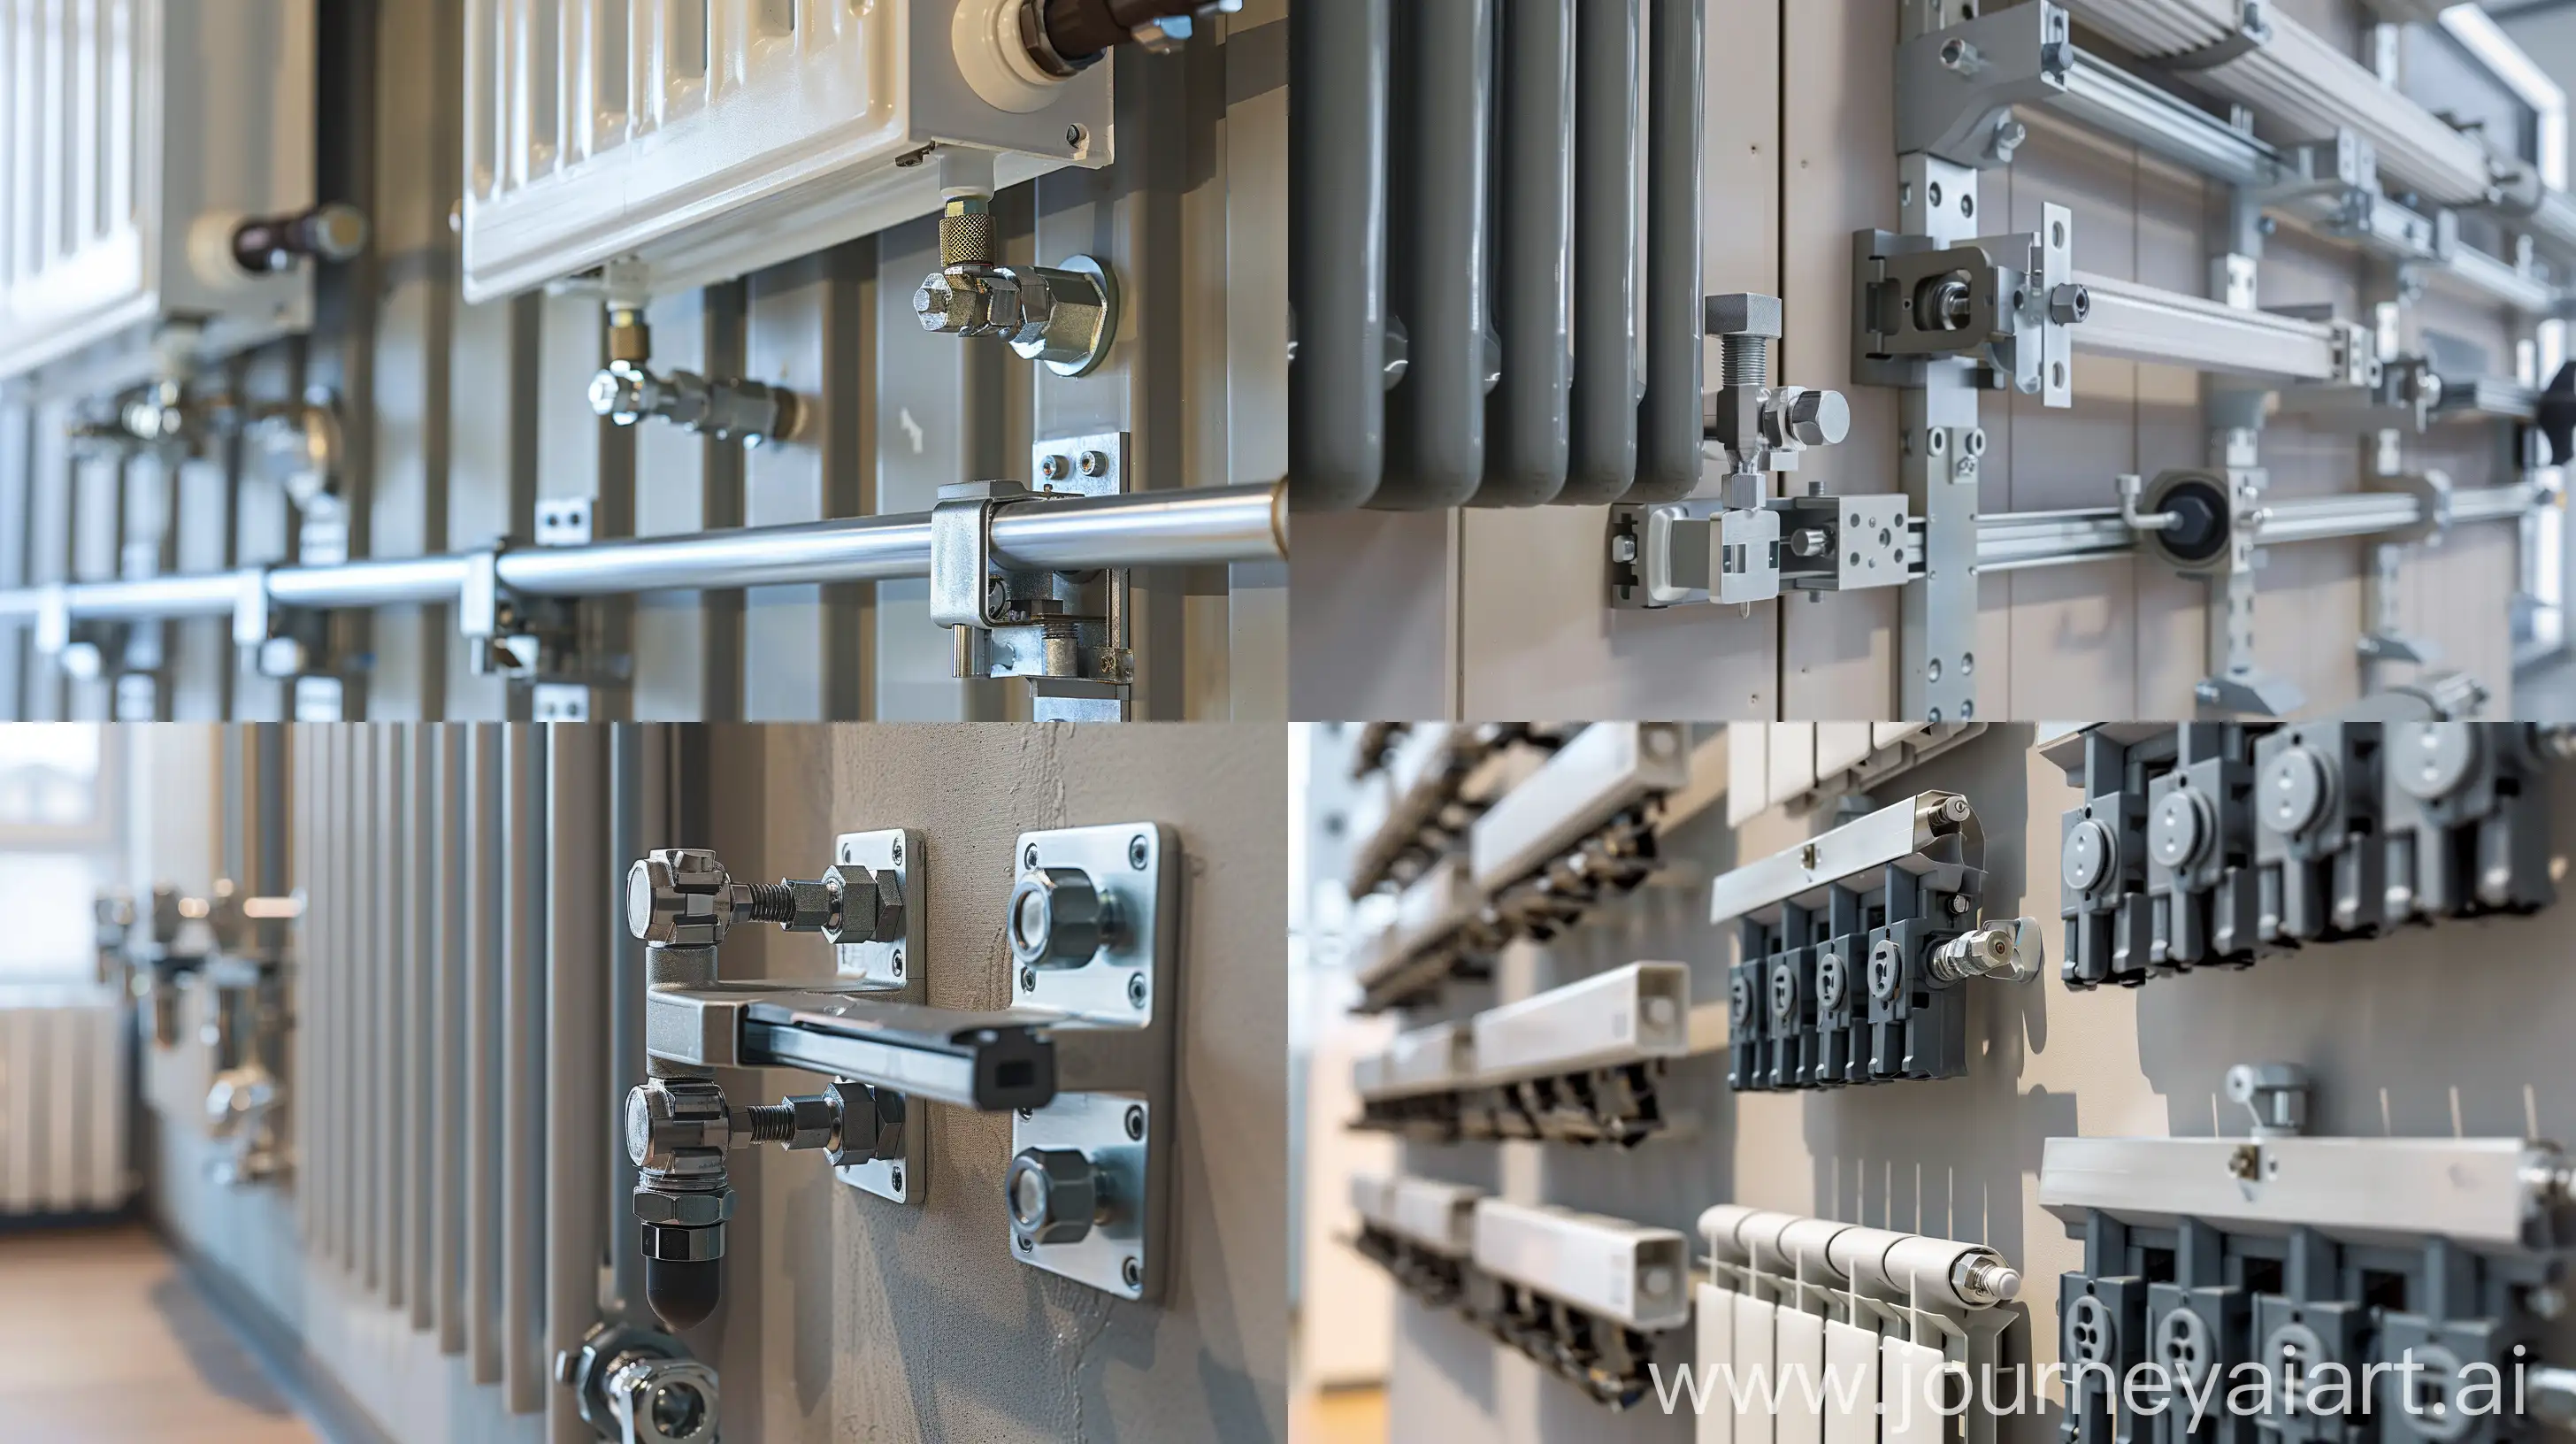 A high-resolution photograph depicting various methods of attaching heating radiators to a wall. The image showcases the installation process, featuring floor-mounted brackets, wall-mounted brackets, and specialized fastening systems. The radiators are securely affixed to the wall, highlighting the durability and stability of each mounting technique. Lighting accentuates the details of the brackets and the radiators, ensuring clarity in understanding the installation process. The composition provides a clear view of the attachment points, aiding in comprehension of the methods utilized. The background environment suggests a typical indoor setting, evoking a sense of practicality and functionality.  --ar 16:9 